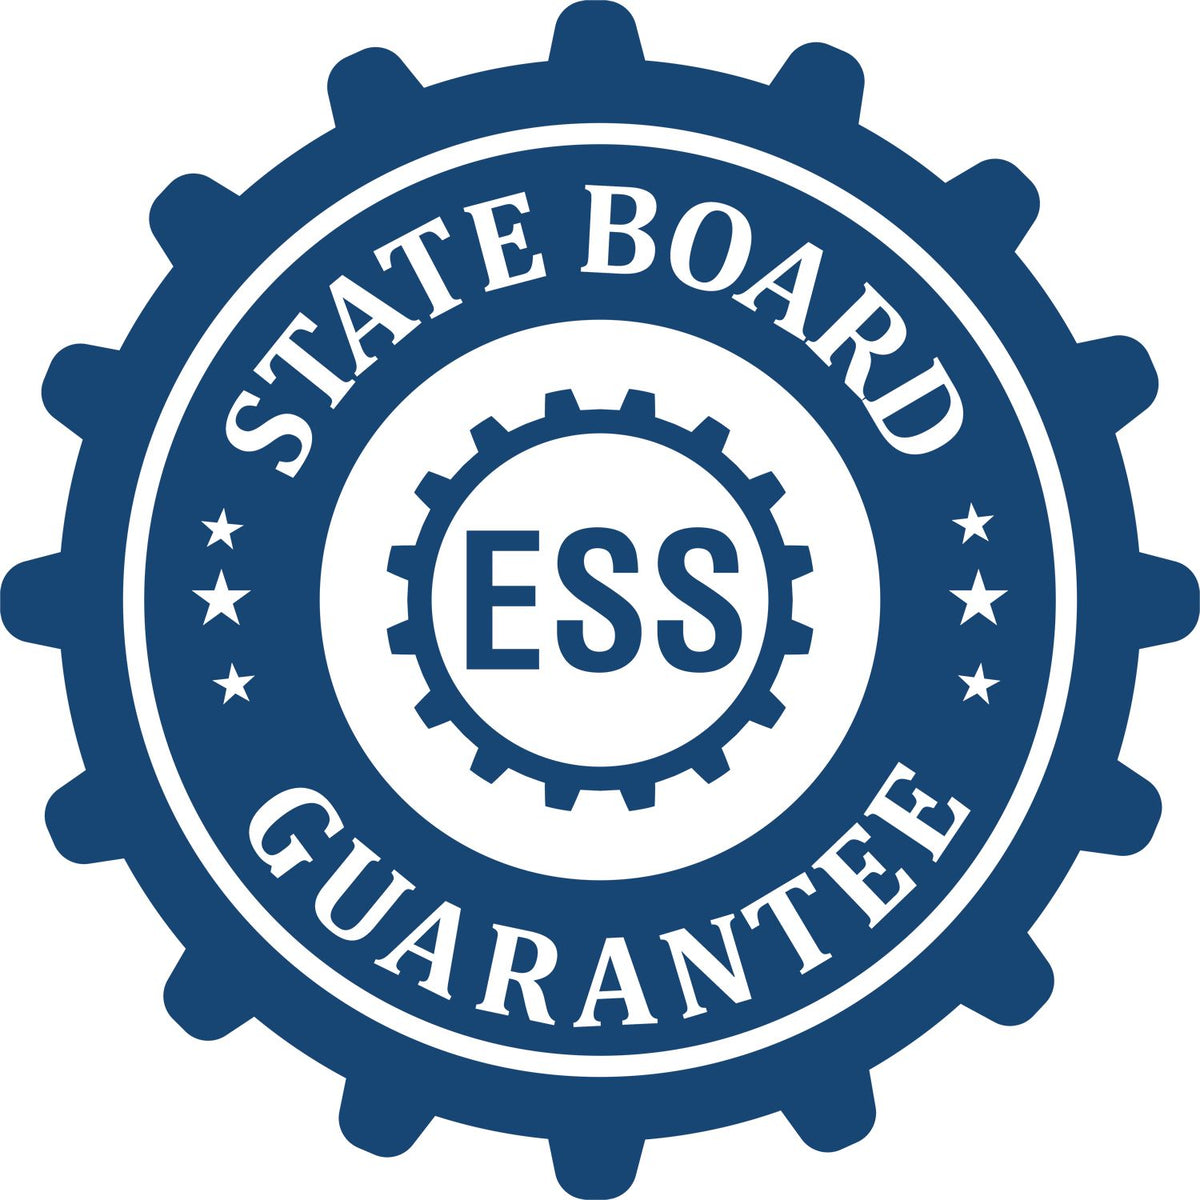 An emblem in a gear shape illustrating a state board guarantee for the Hybrid Arkansas Engineer Seal